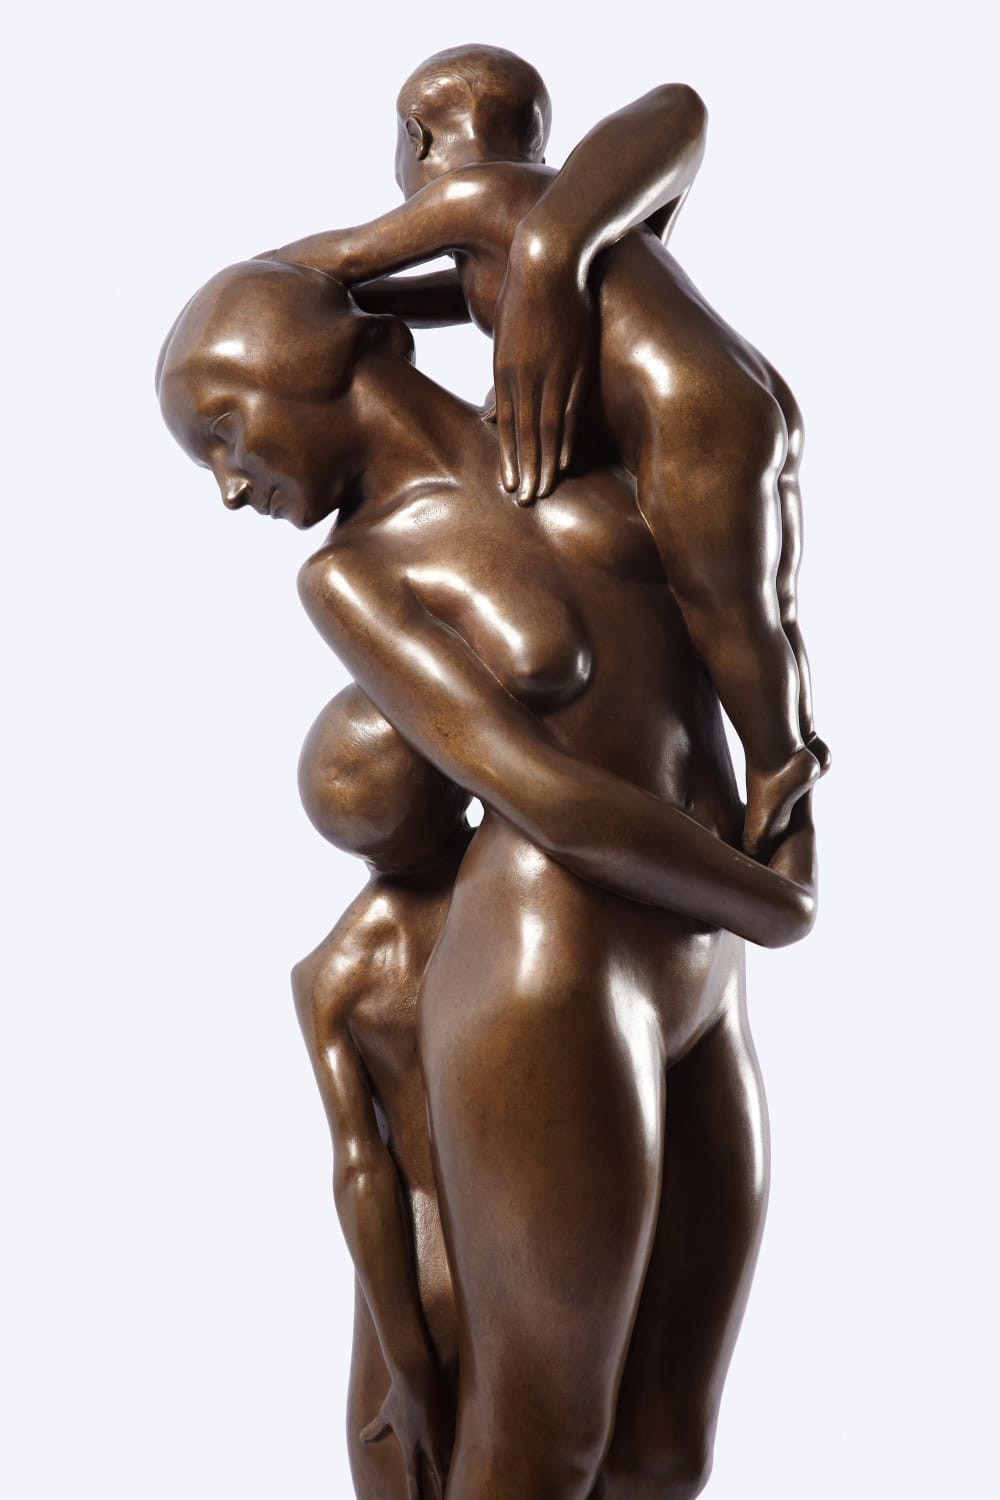 Alexander Carrick RSA (1882-1966), Felicity [cast by MANCINI, George (1904-89)]  Bronze, 1934, 90 x 24 x 17.5 cm  RSA Diploma Collection (Deposited, 1936) 2000.112